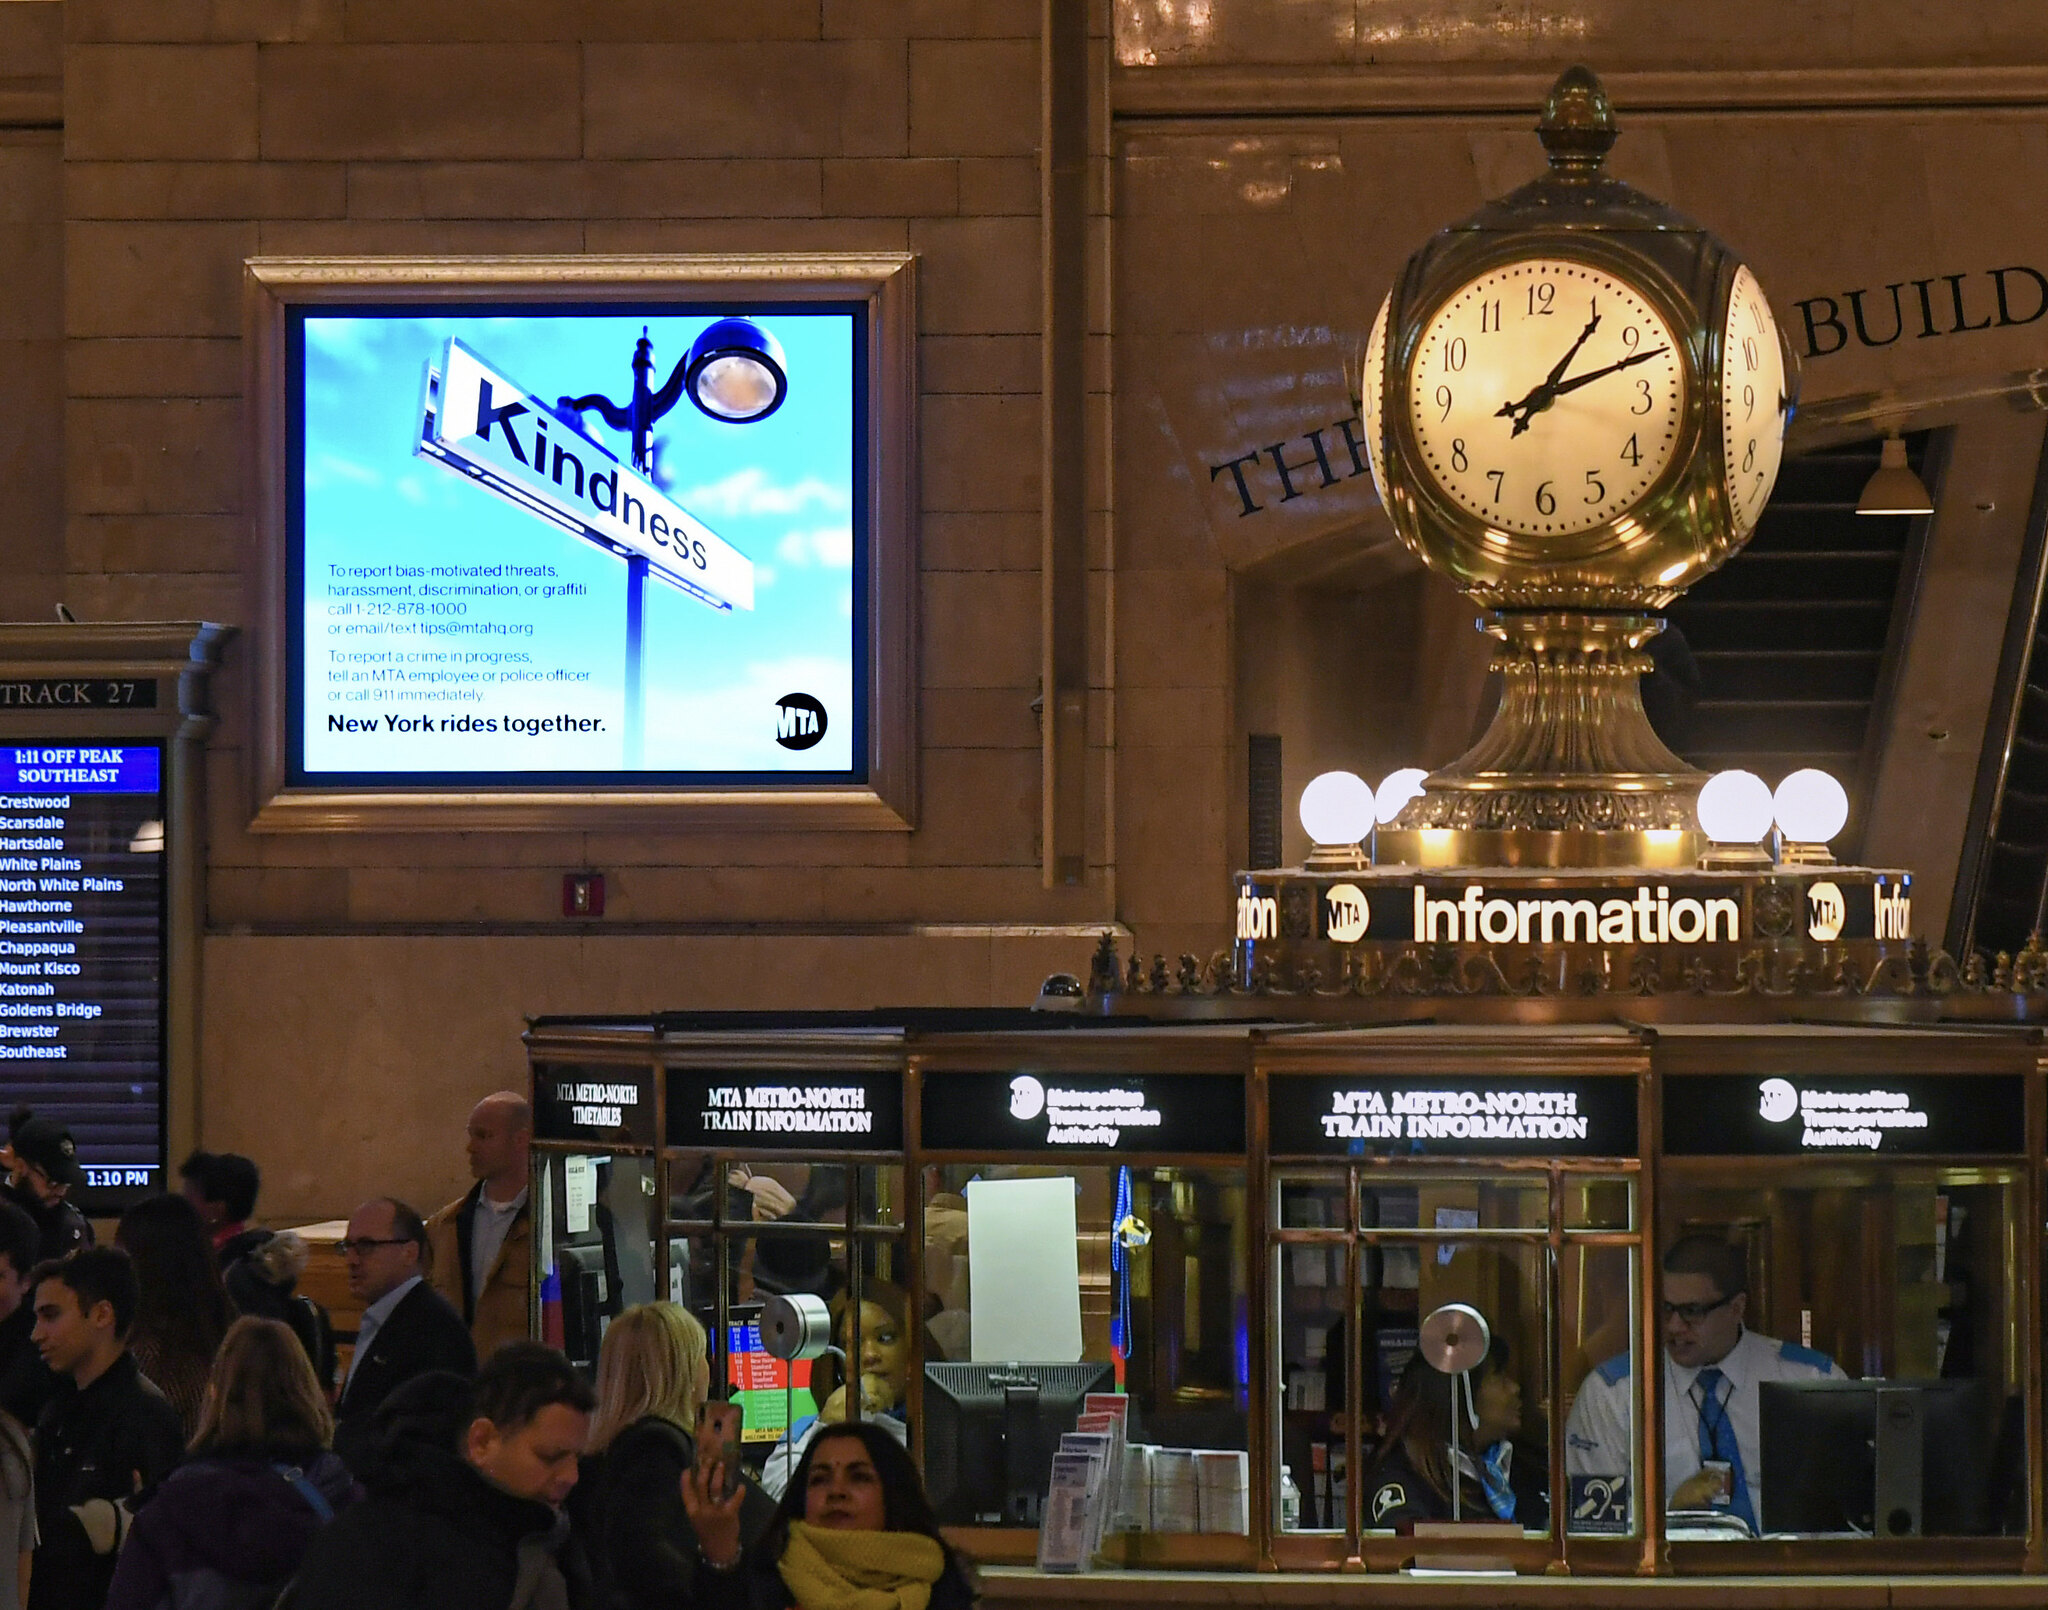 Grand Central Information Booth Closed for Maintenance Work